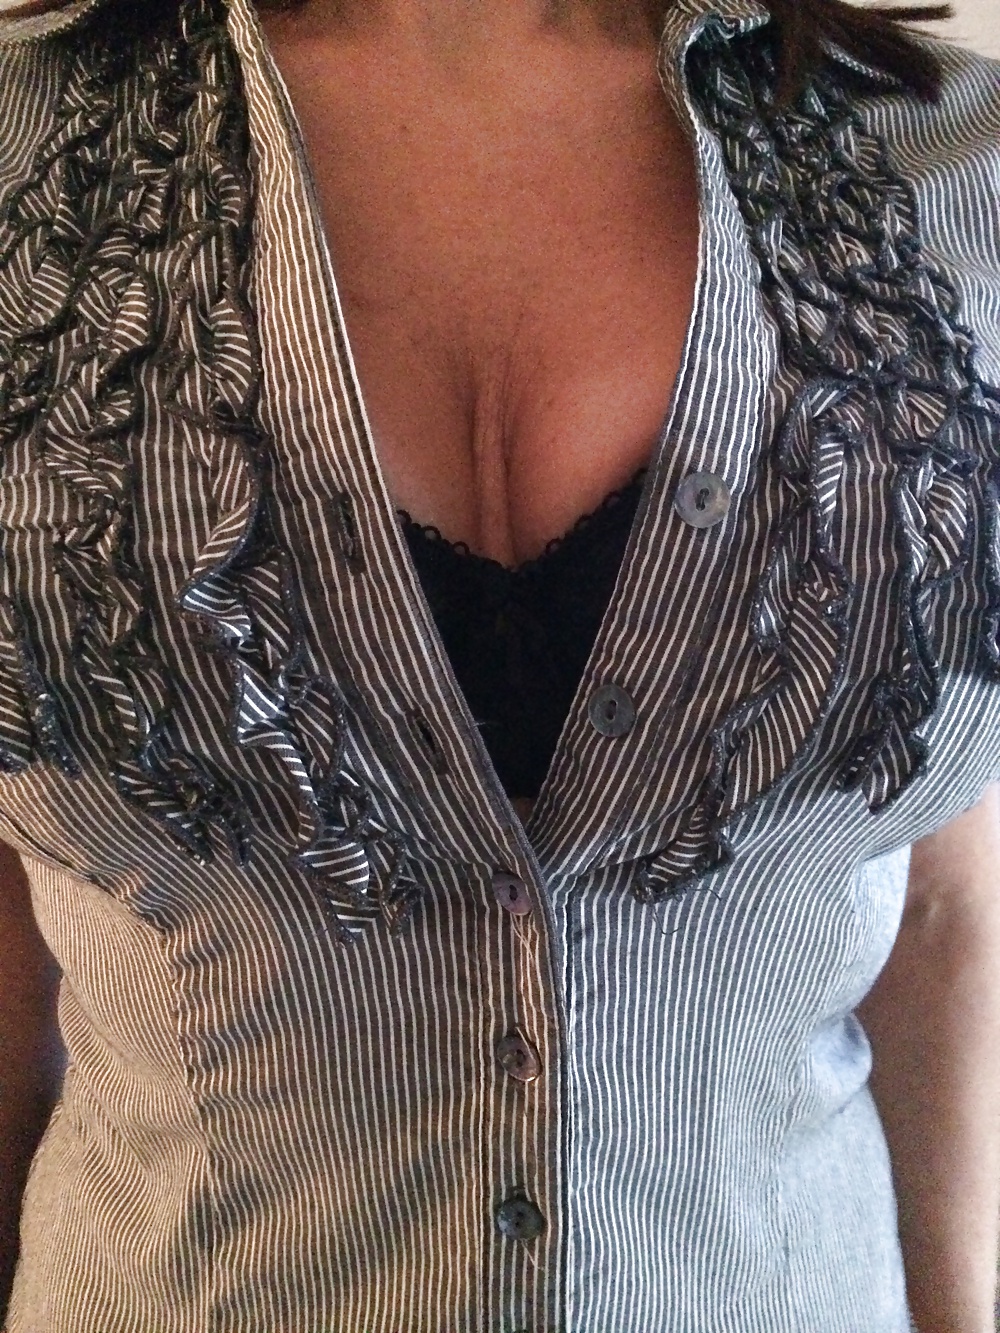 Tryd on an old blouse does it still fit? or a little tight? #25969894